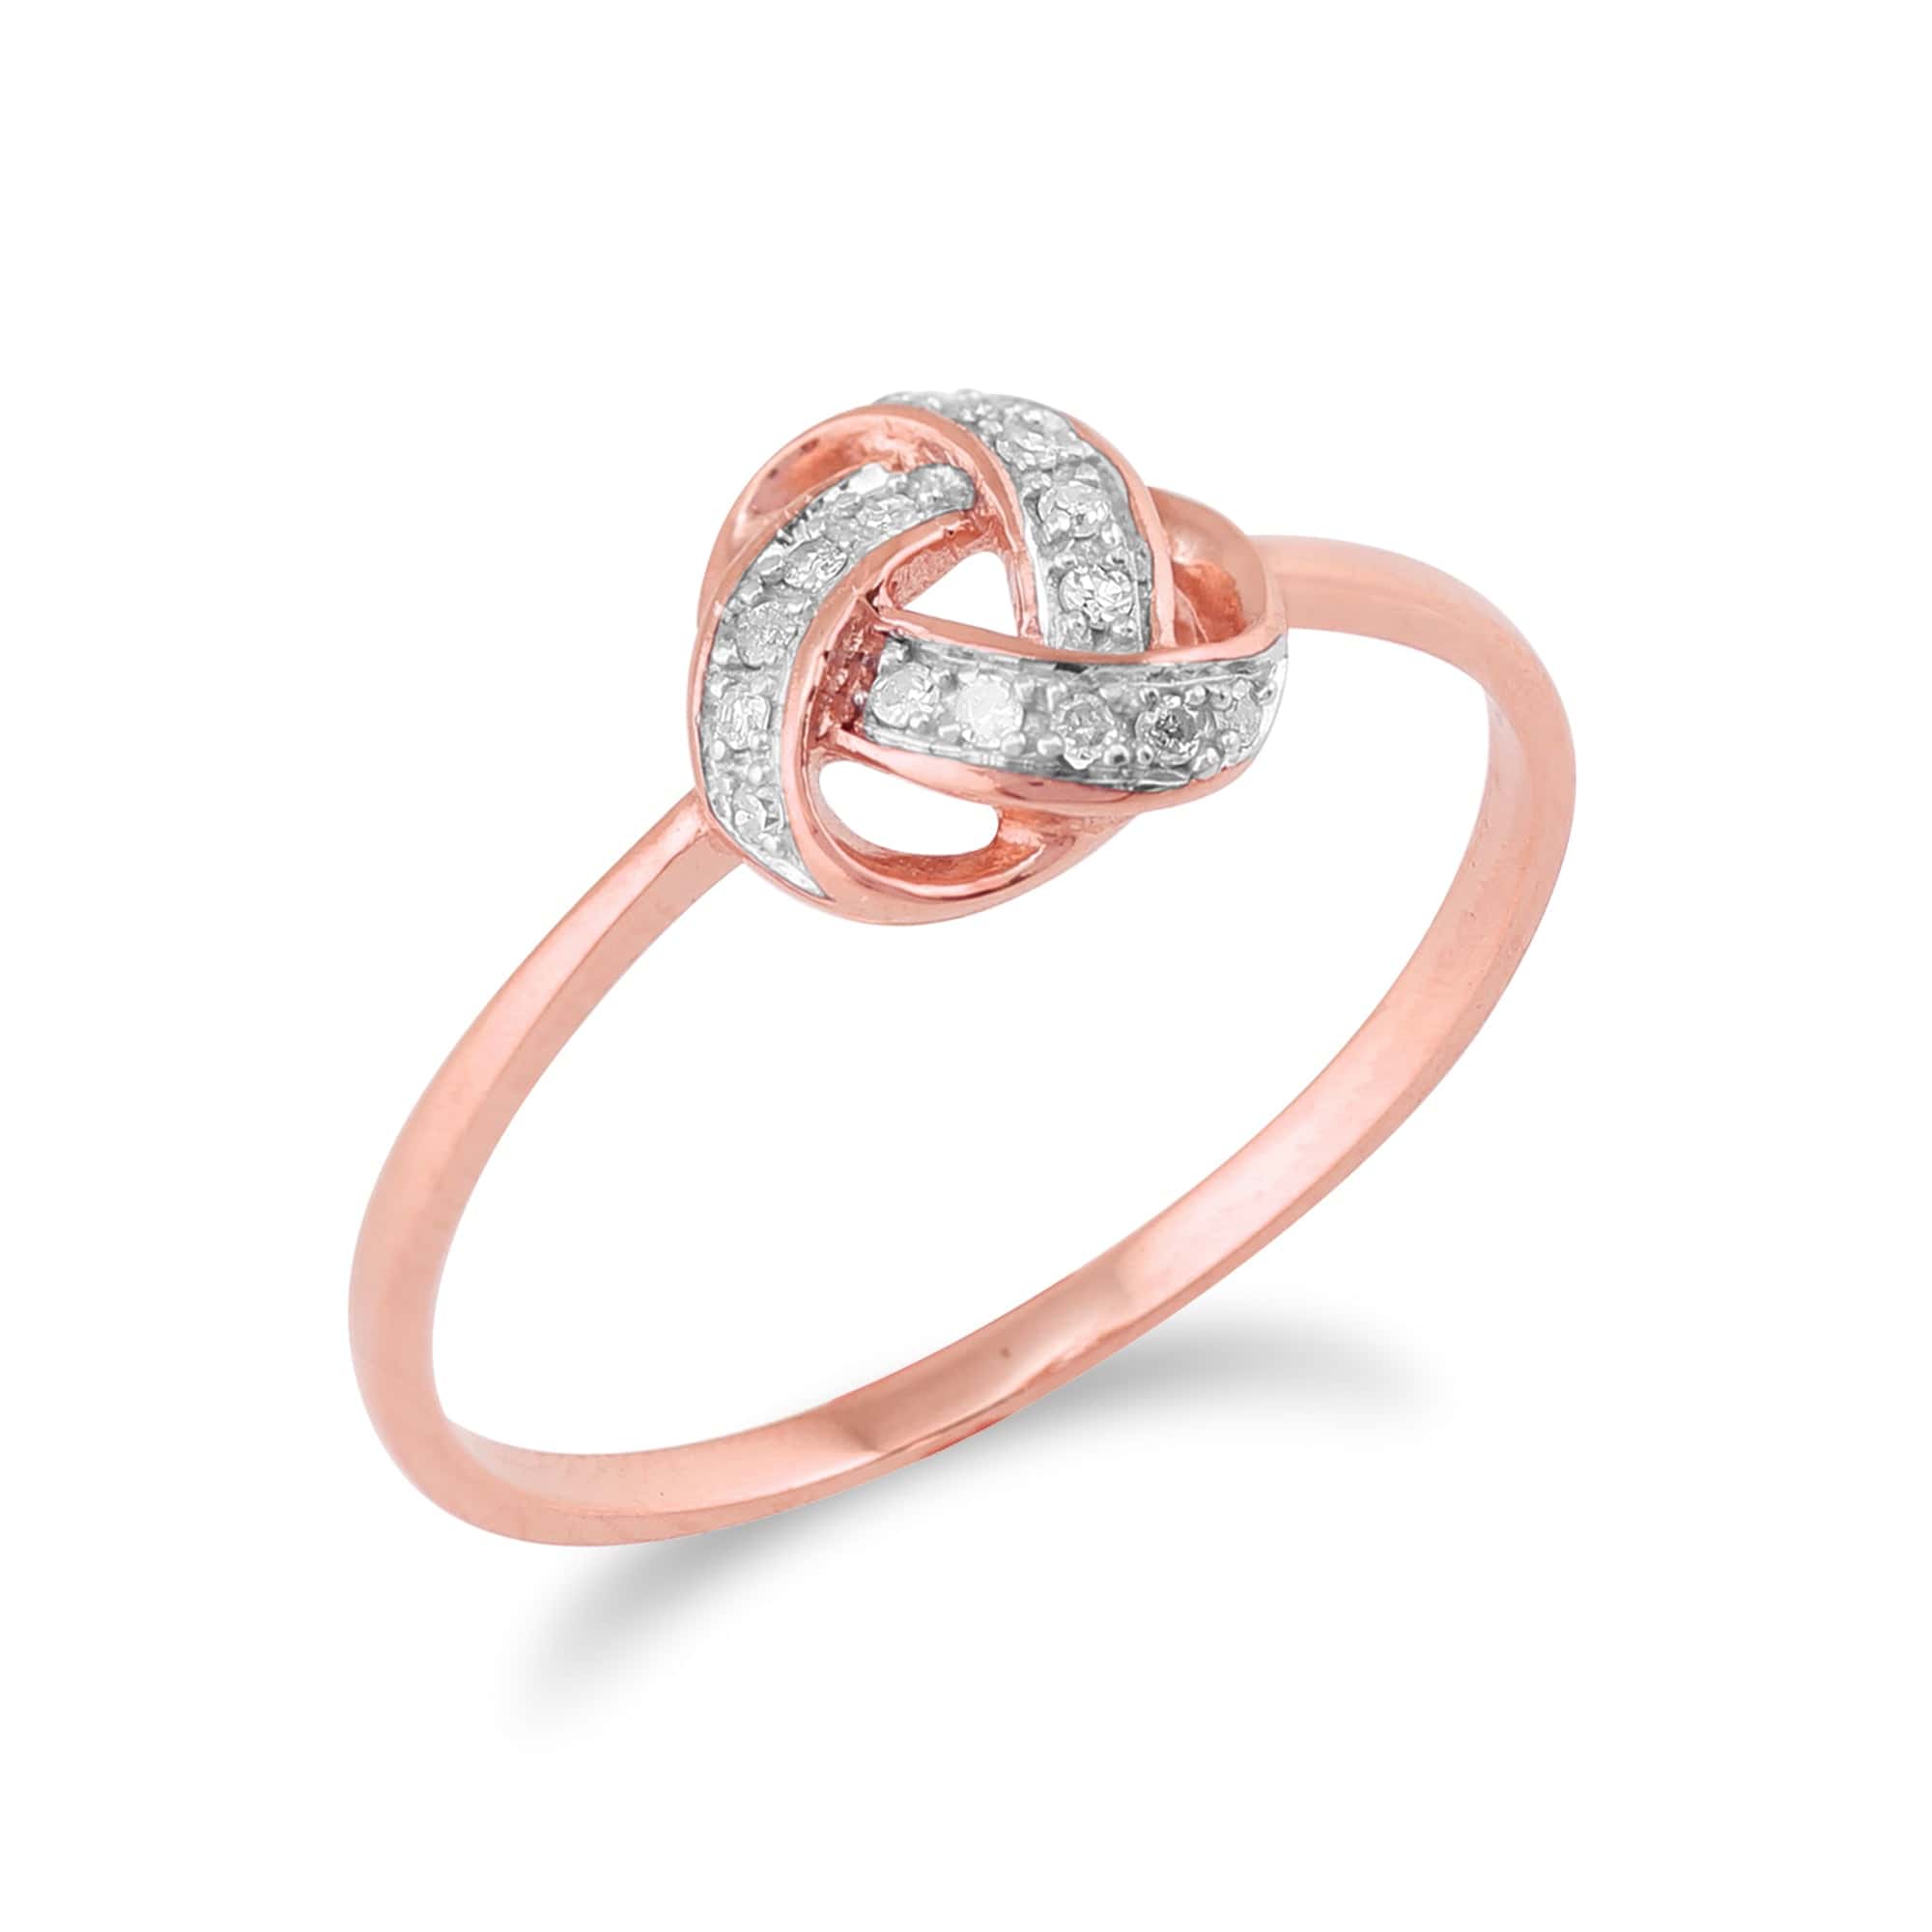 191R0882019 Classic Diamond Love Knot Ring in 9ct Rose Gold 2